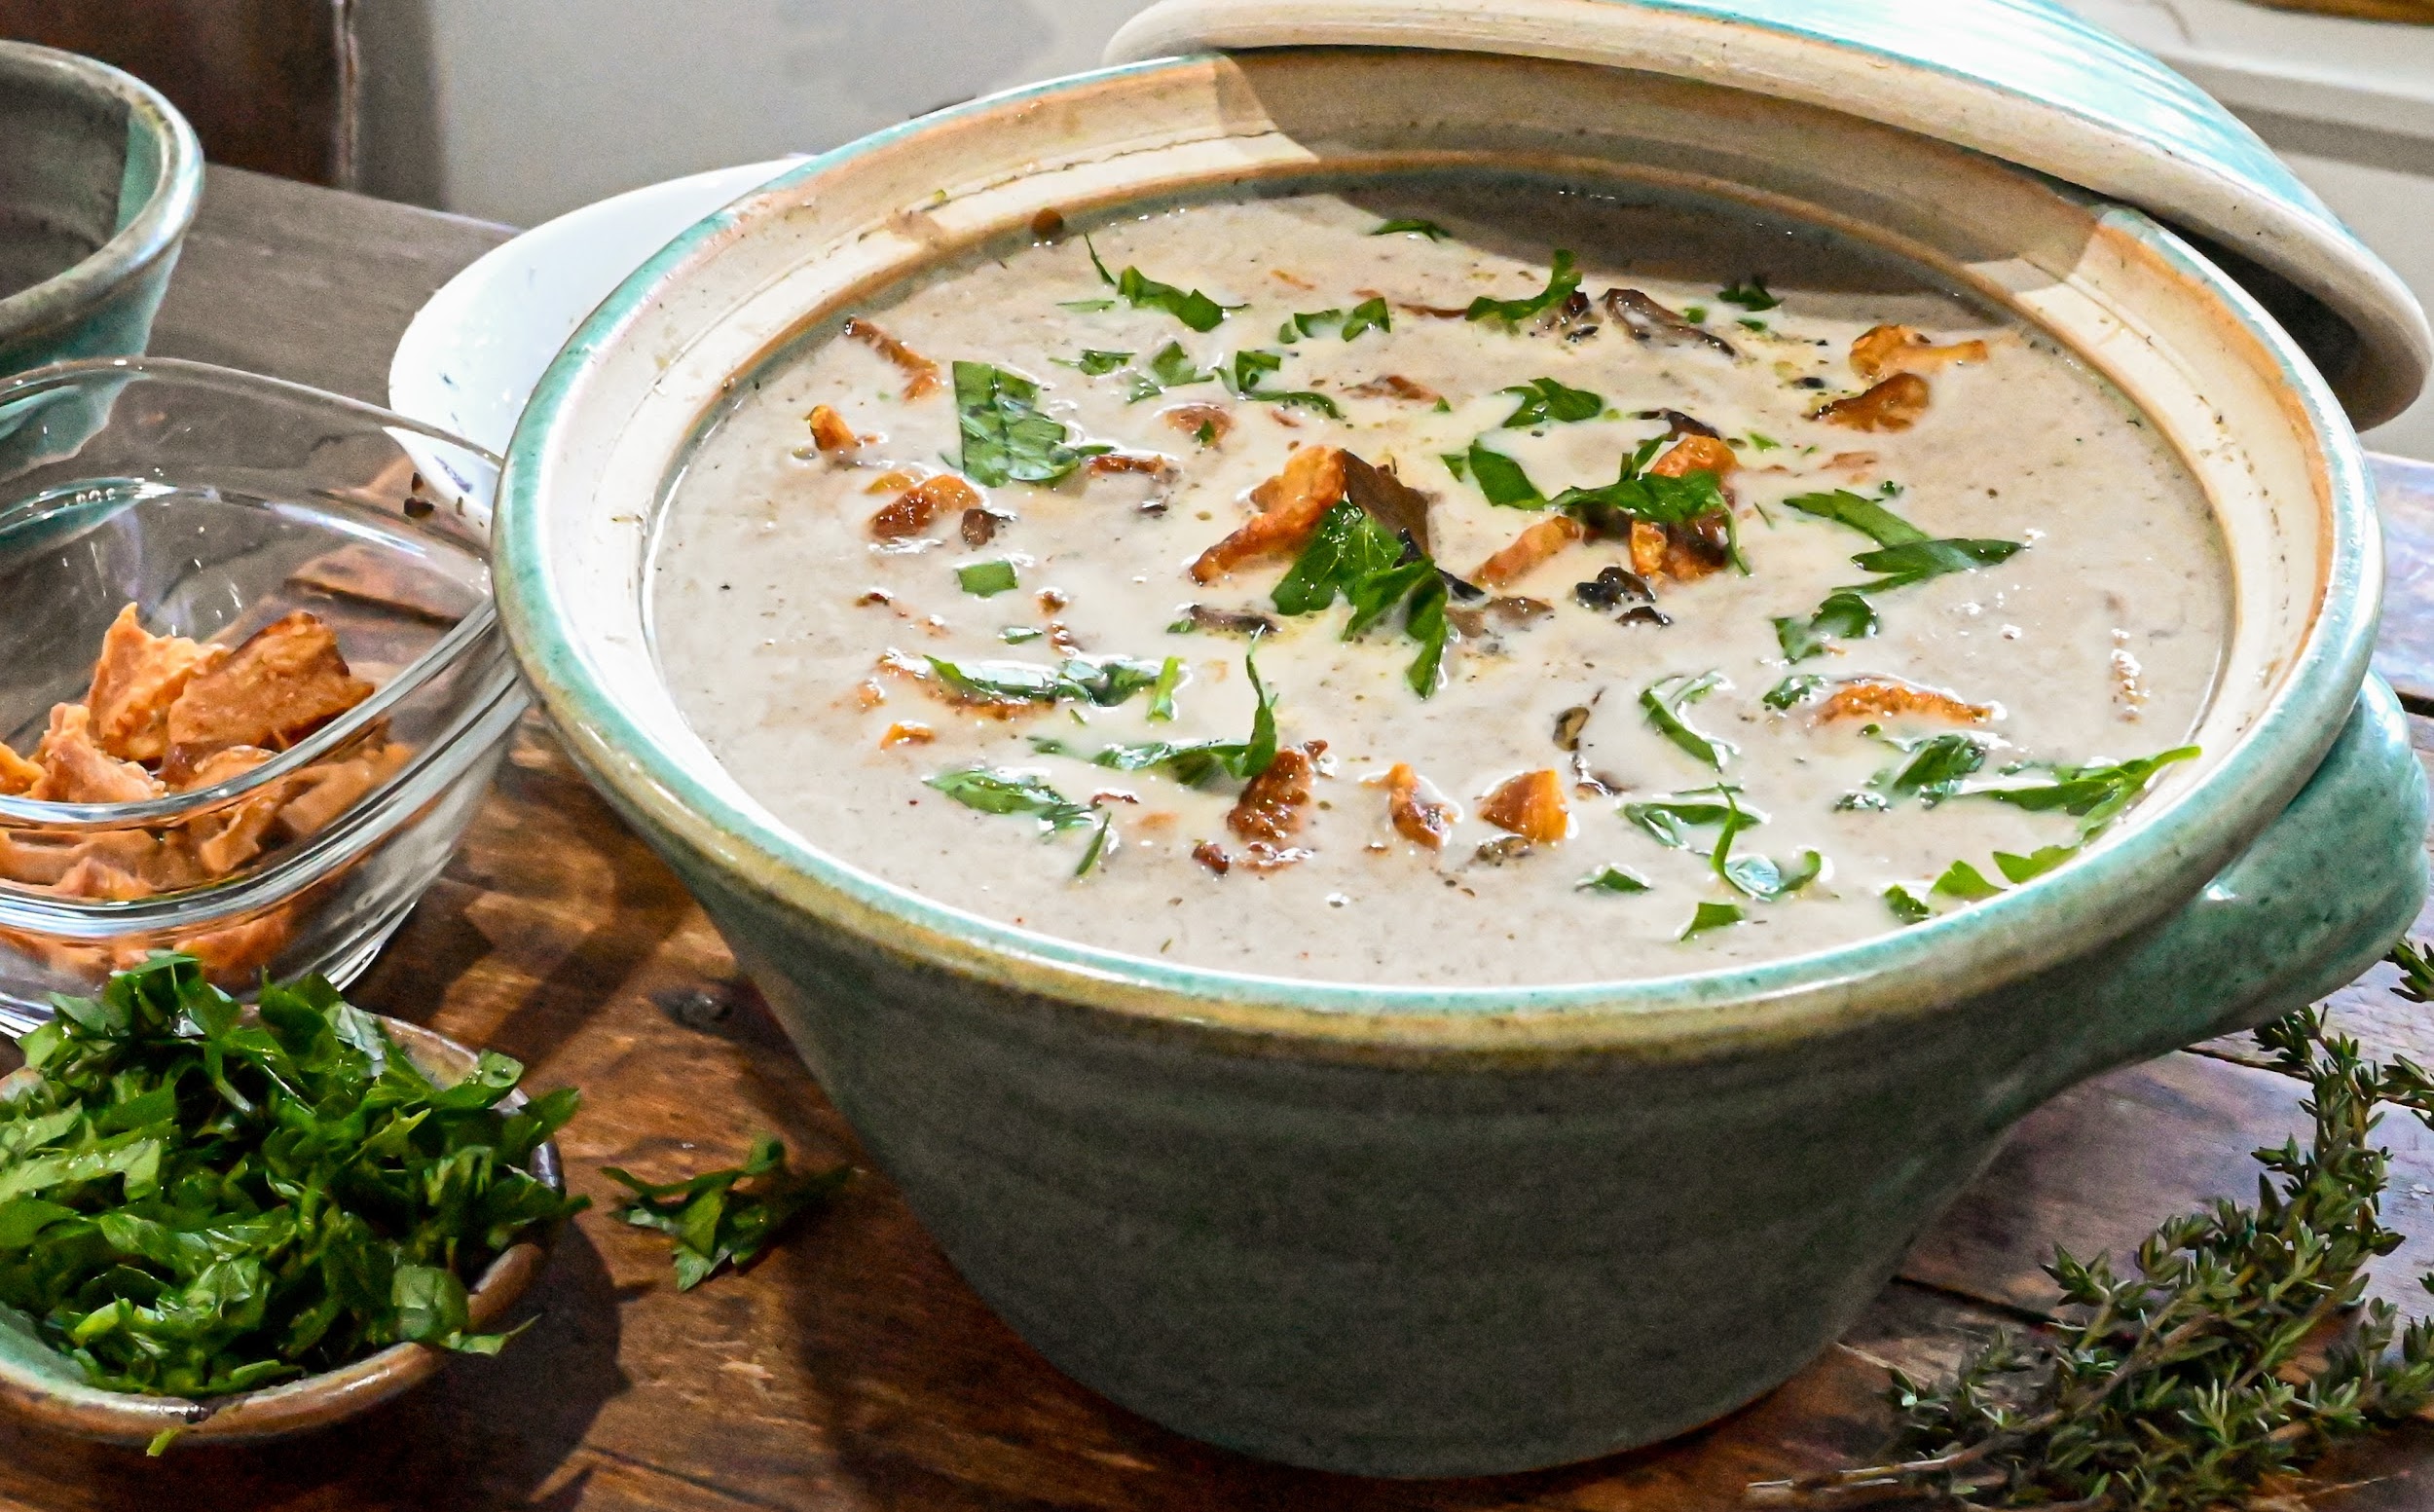 keto mushroom soup in a teal soup tureen ready to serve